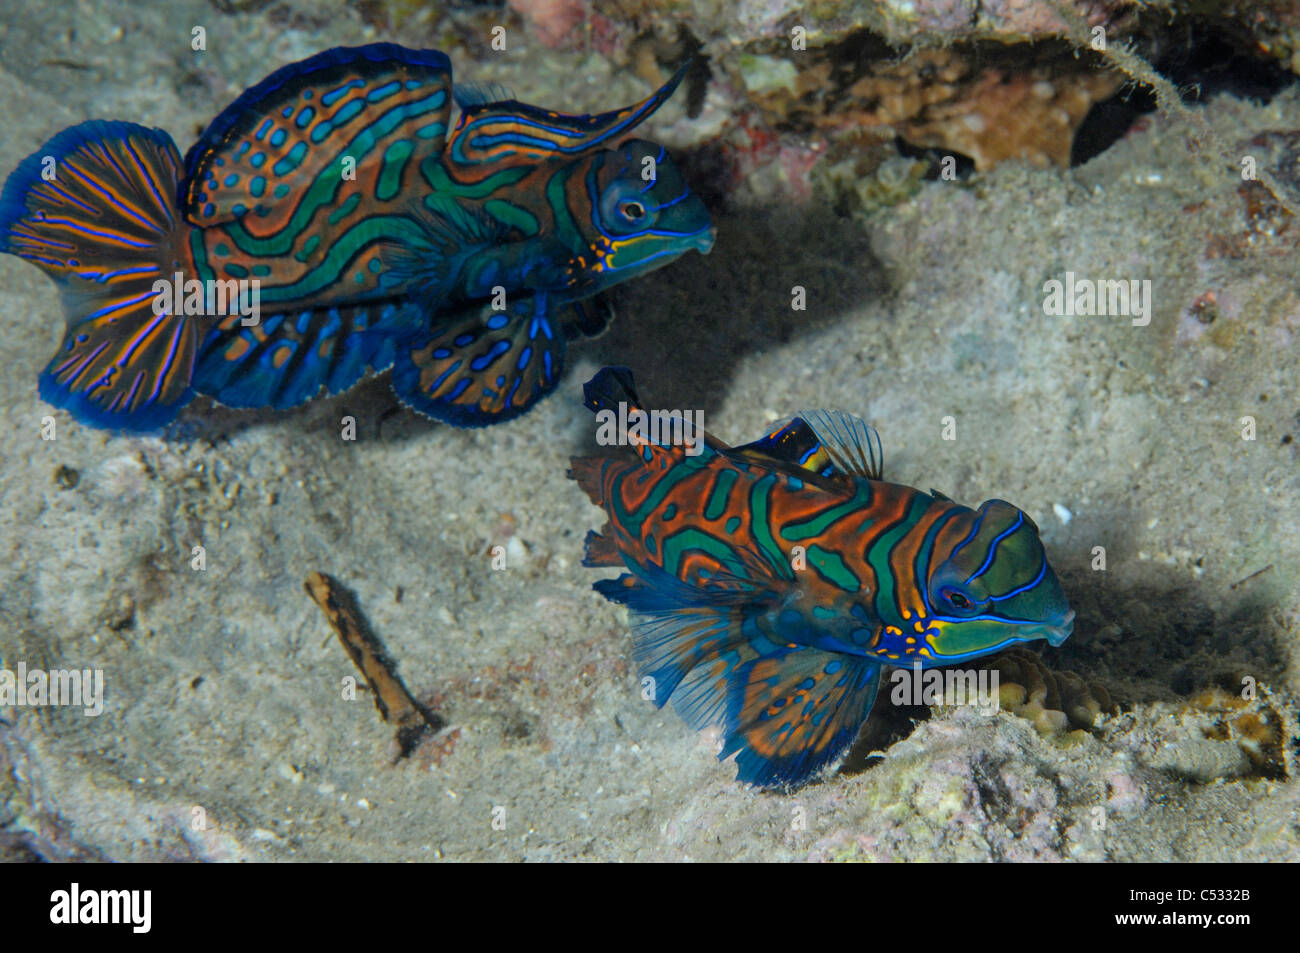 A pair of Mandarinfish on a reef in Indonesia. Stock Photo